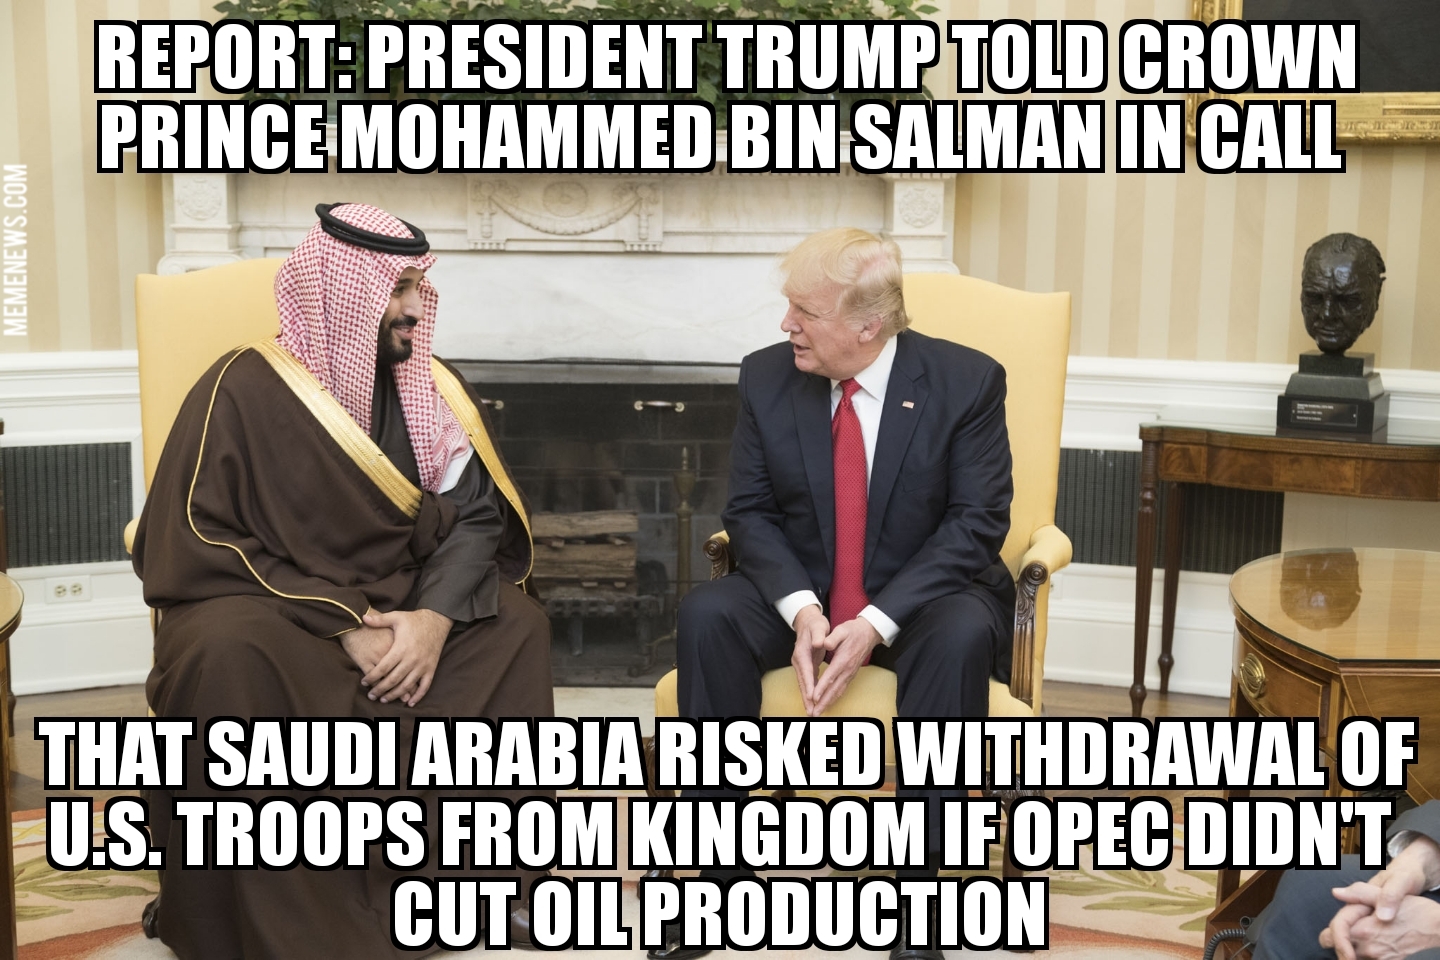 Trump threatened MBS with troop withdrawal over oil production